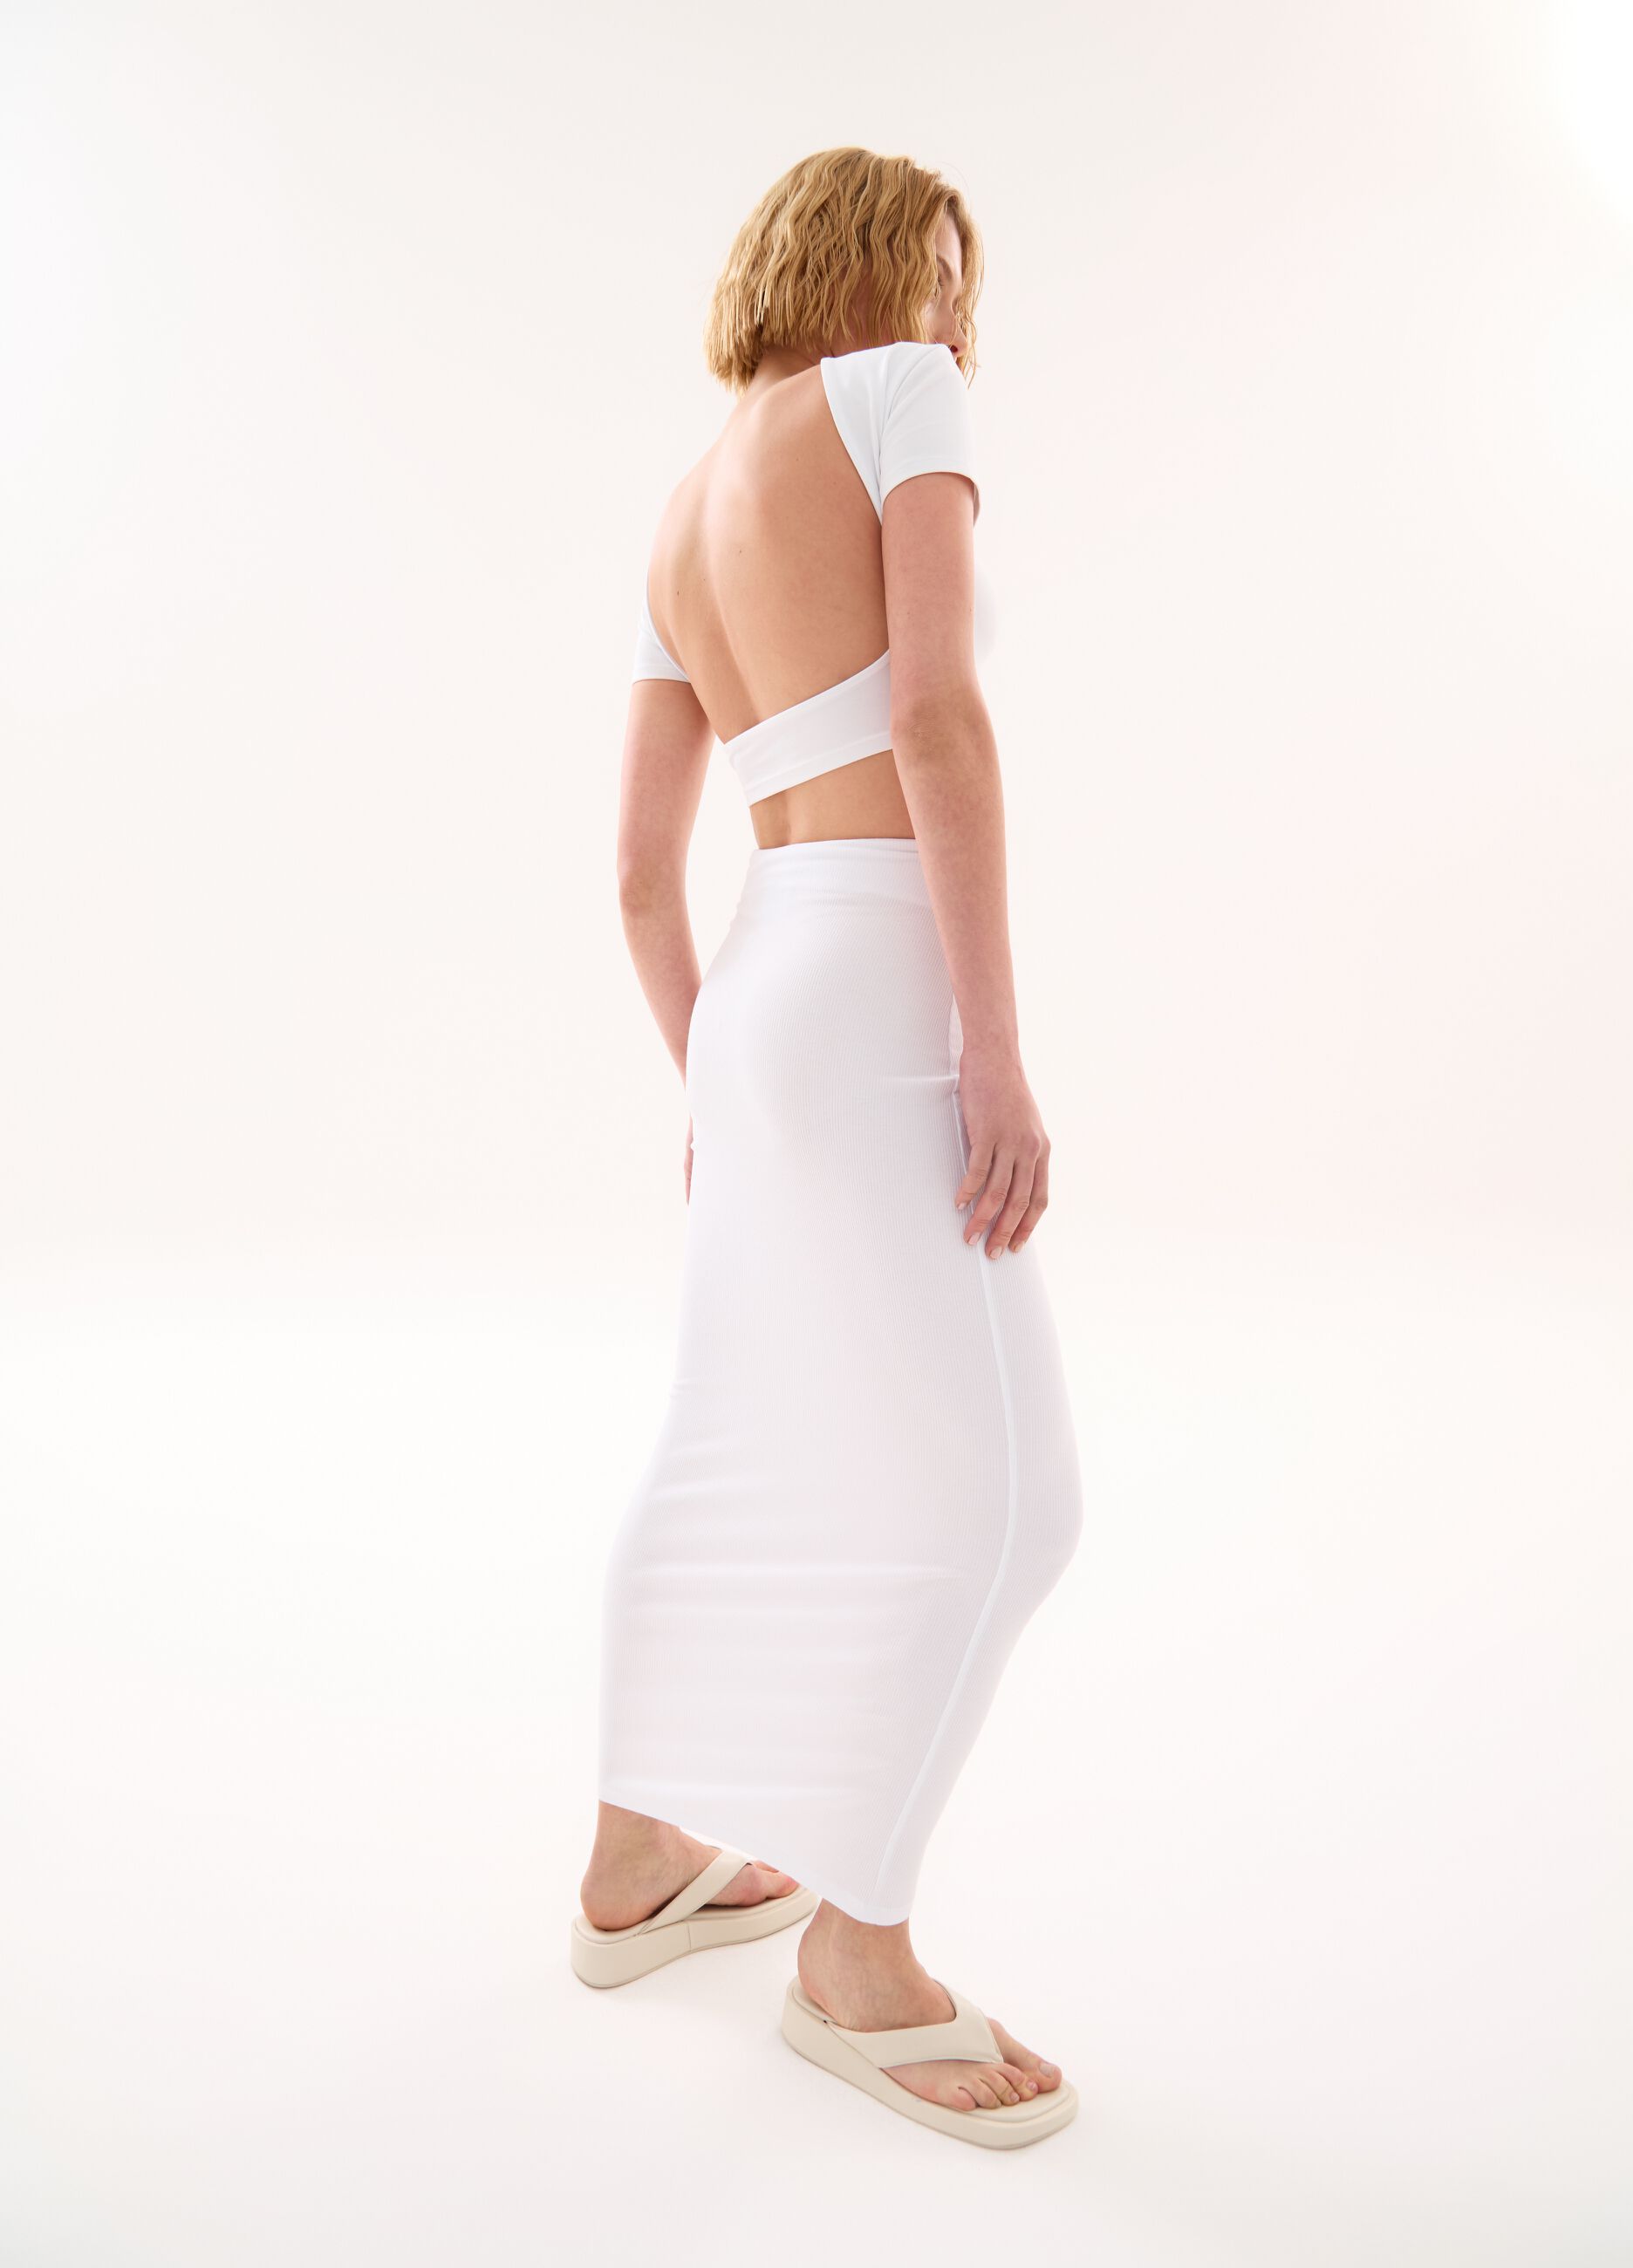 Backless Crop T-shirt White